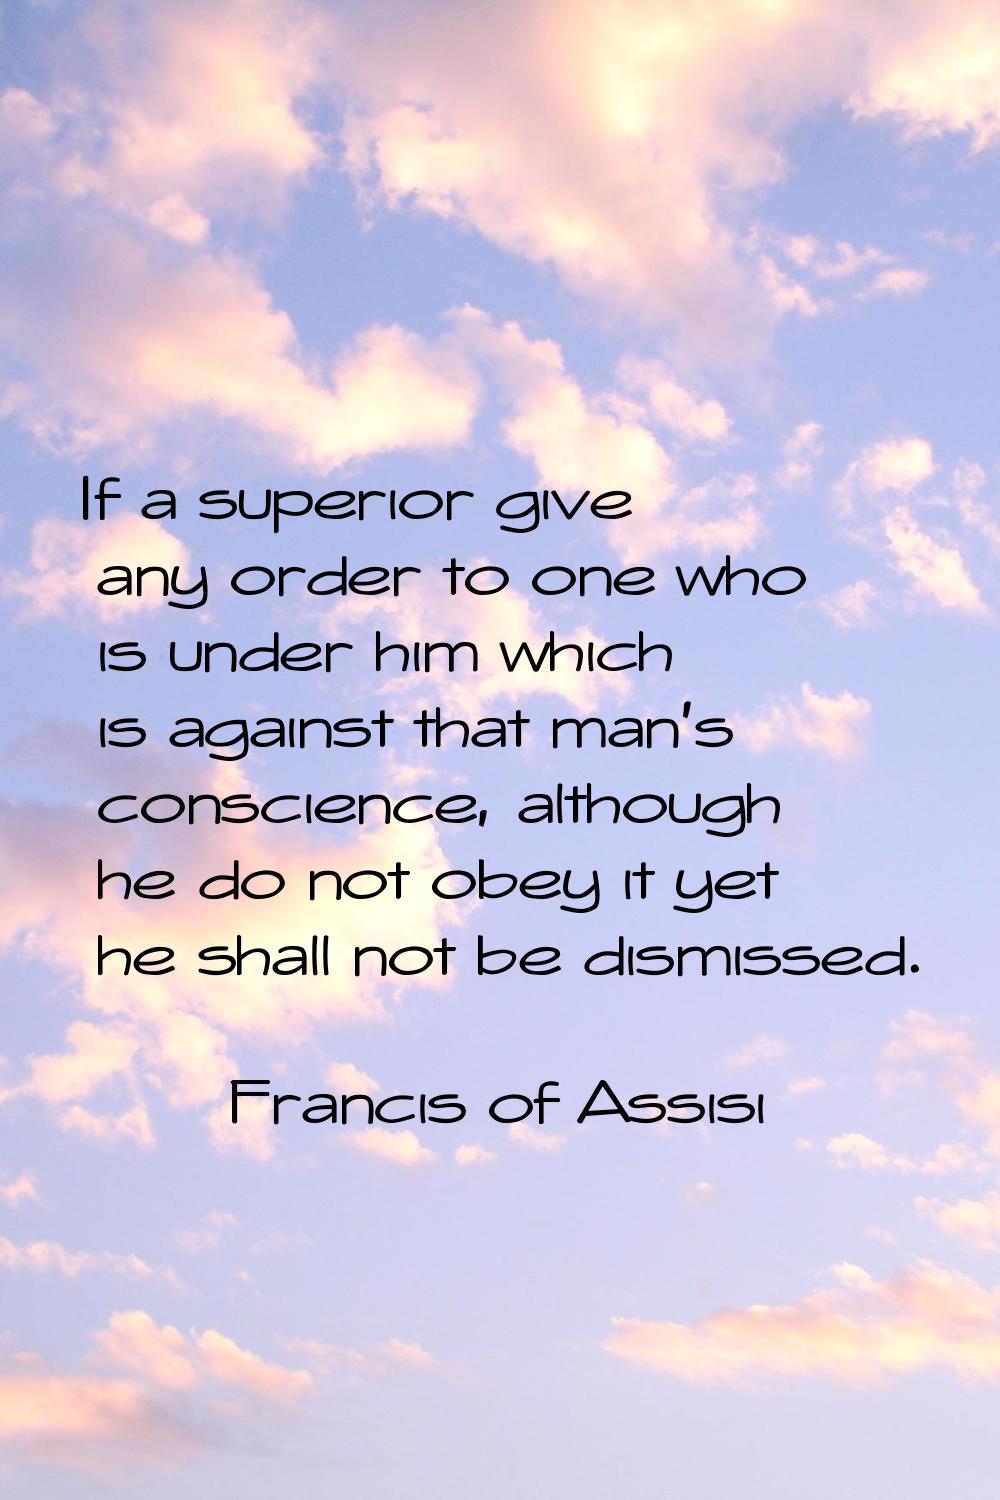 If a superior give any order to one who is under him which is against that man's conscience, althou